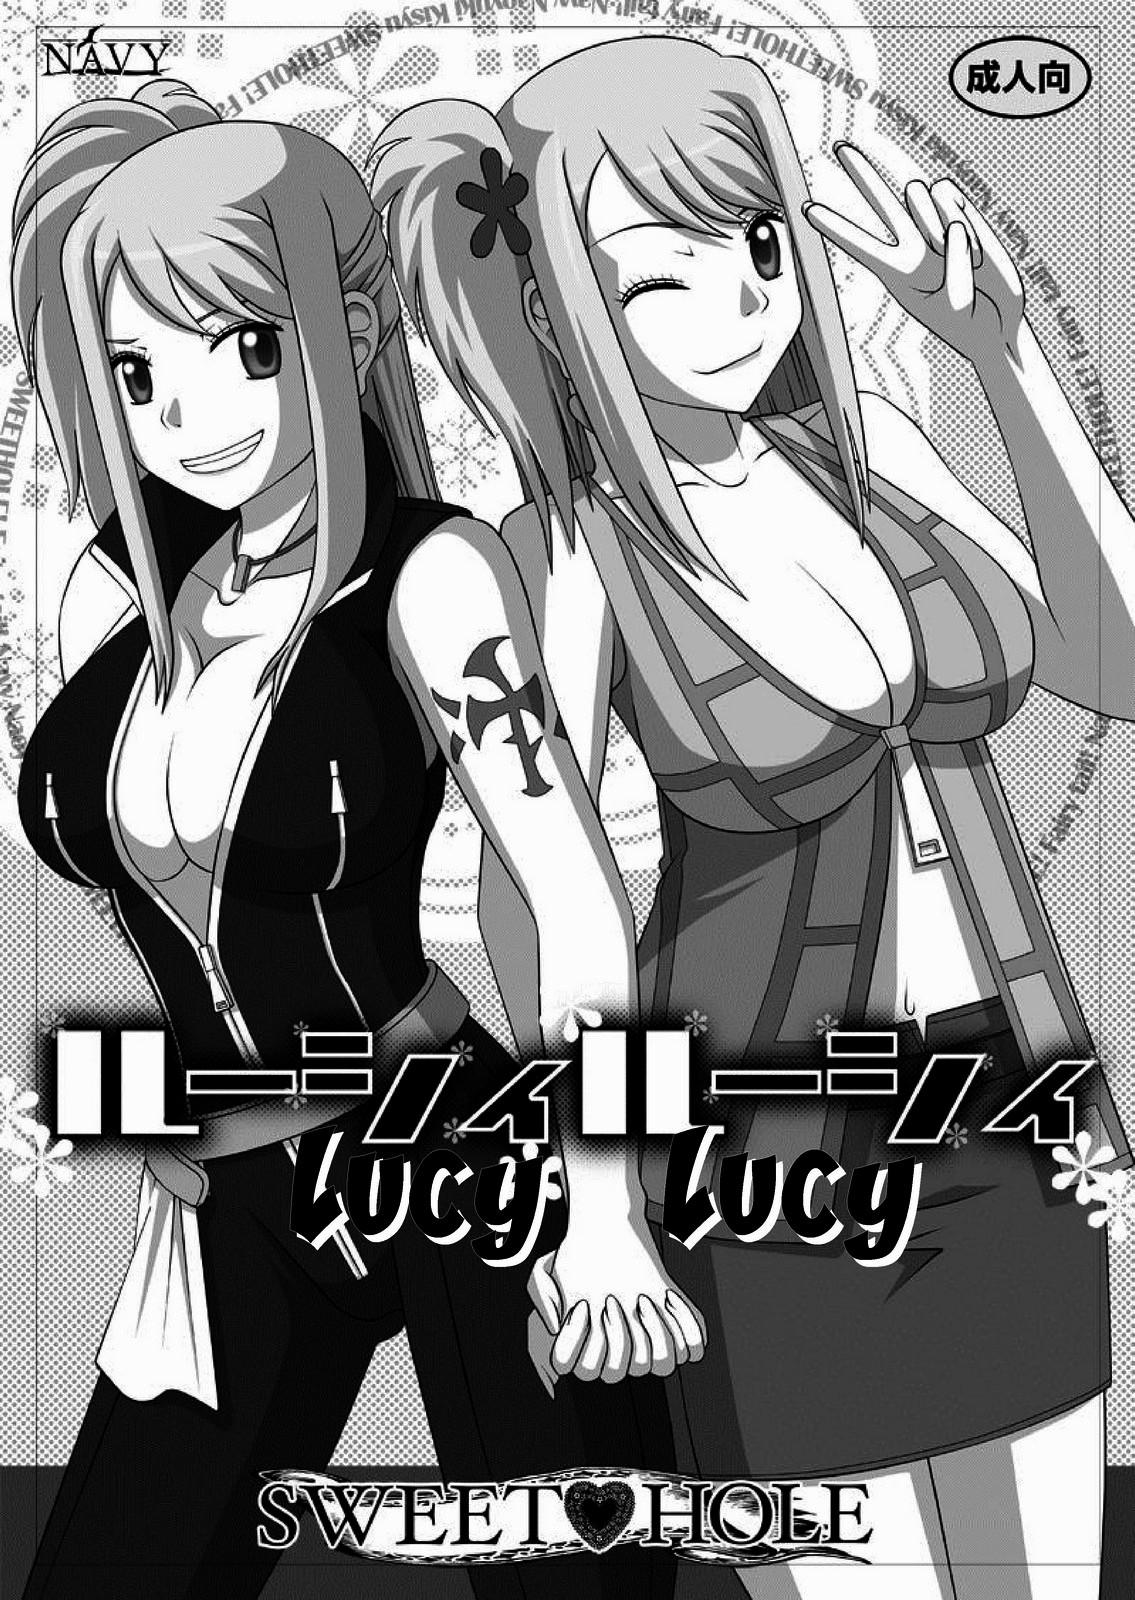 [NAVY (Kisyuu Naoyuki)] Okuchi no Ehon Vol. 36 Sweethole -Lucy Lucy-  | Picture Book of the Mouth Vol. 36 Sweethole  -Lucy Lucy- Mouth is Lover (Fairy Tail) [English] [EHCOVE] [Digital] 1